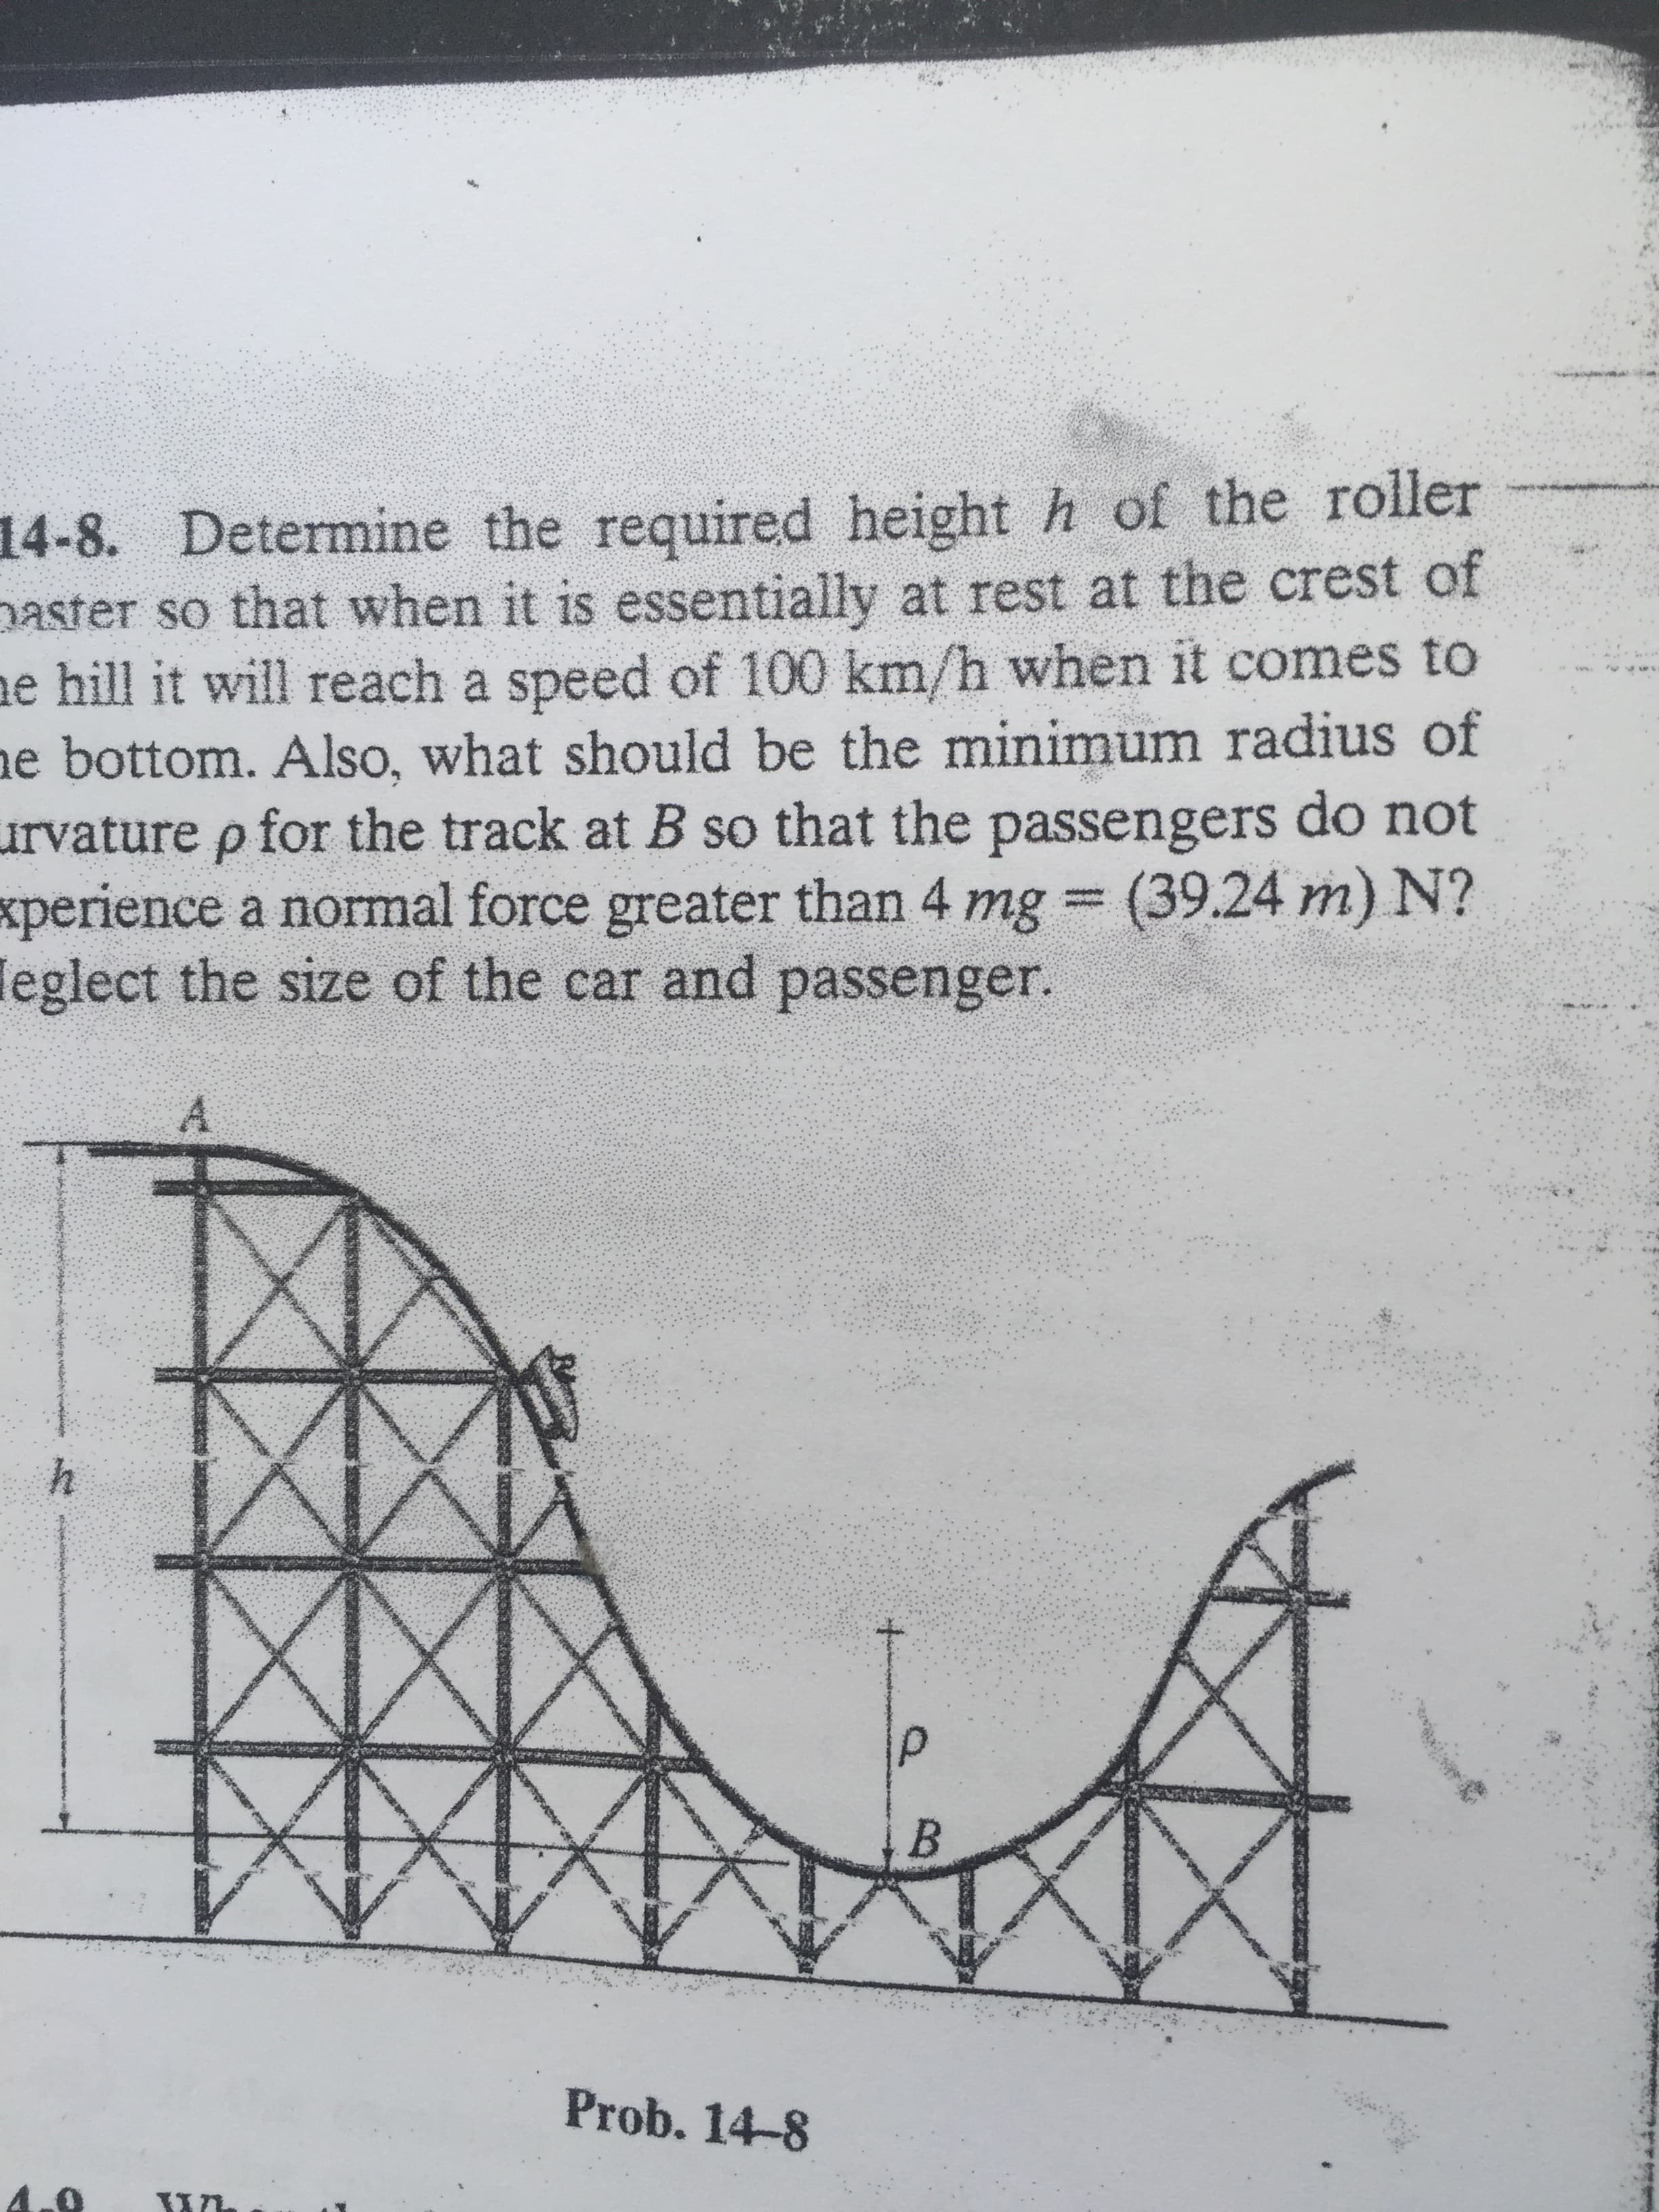 14-8. Determine the required height h of the roller
paster so that when it is essentially at rest at the crest of
ne hill it will reach a speed of 100 km/h when it comes to
ne bottom. Also, what should be the minimum radius of
urvature p for the track at B so that the passengers do not
xperience a normal force greater than 4 mg (39.24 m) N?
leglect the size of the car and passenger.
%3D
A.
Prob. 14-8
